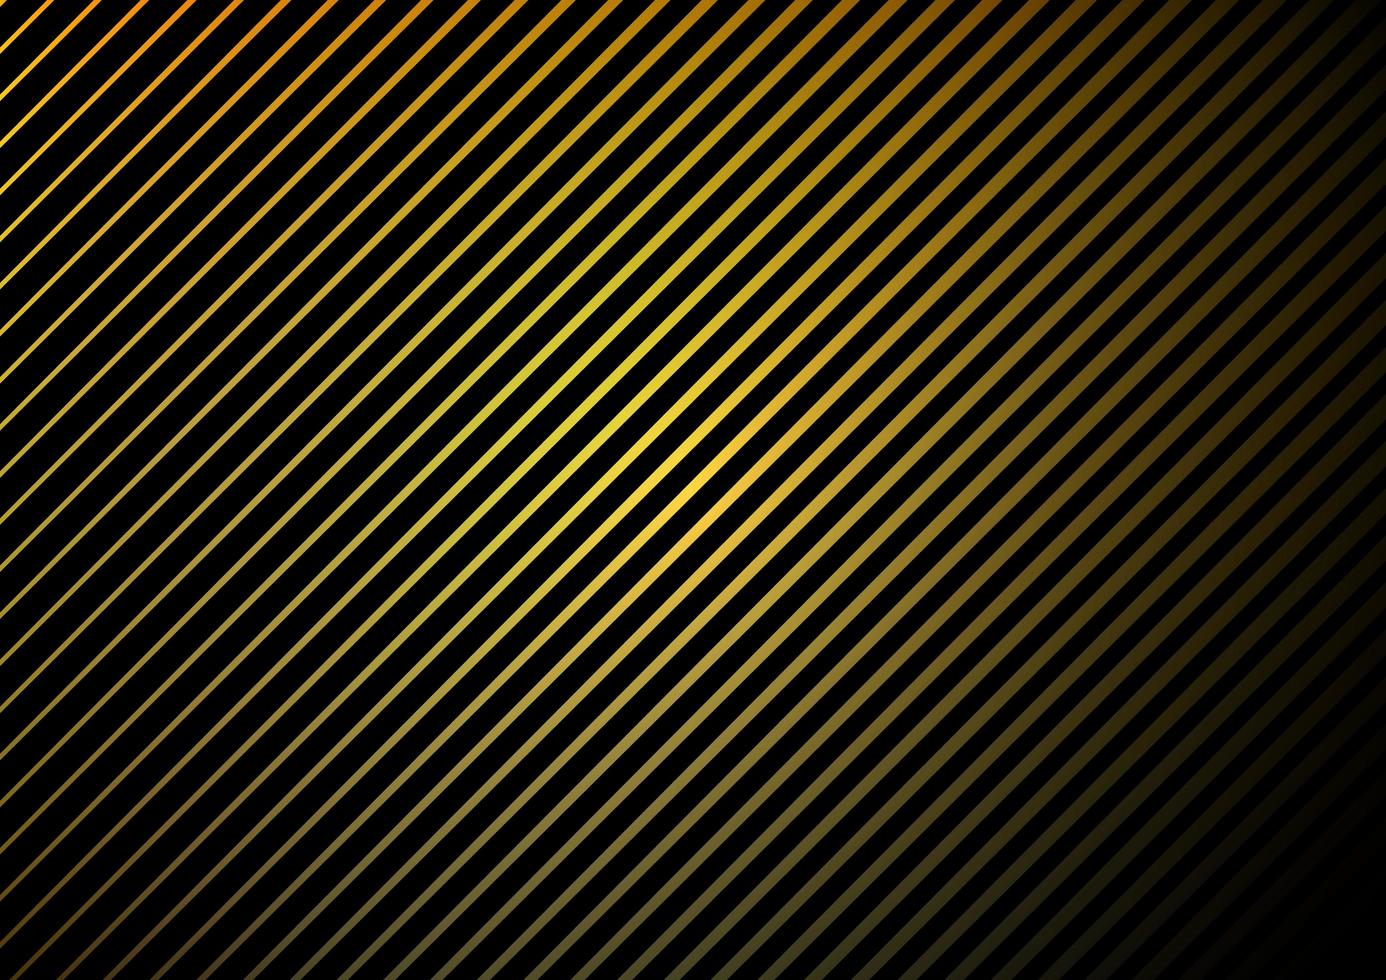 Gradieny yellow and black diagonal line pattern vector